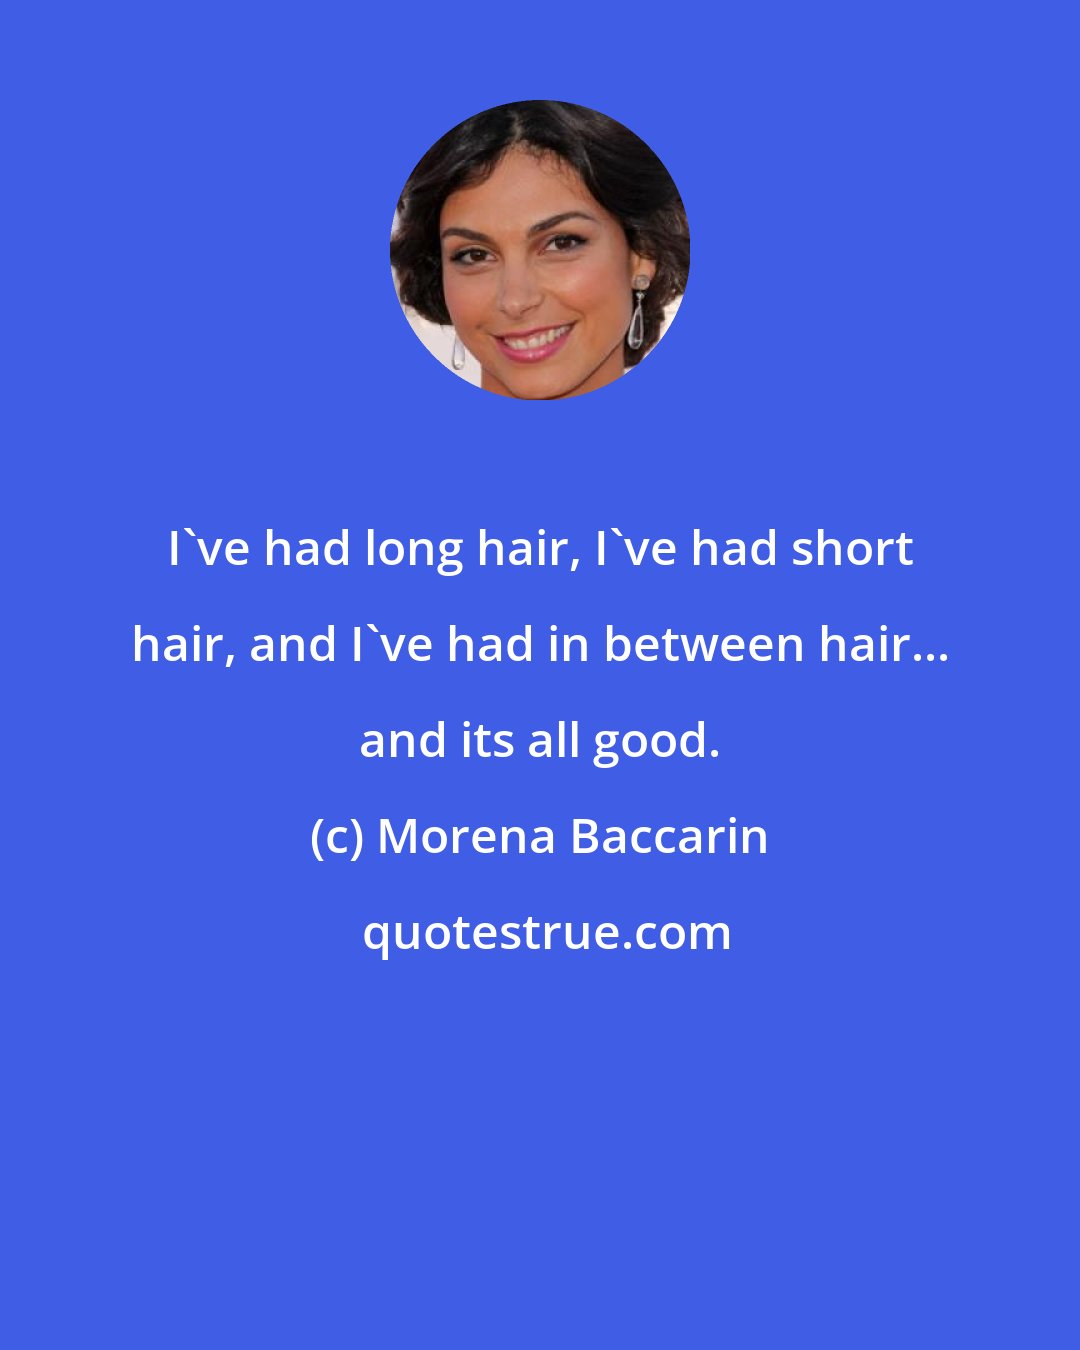 Morena Baccarin: I've had long hair, I've had short hair, and I've had in between hair... and its all good.